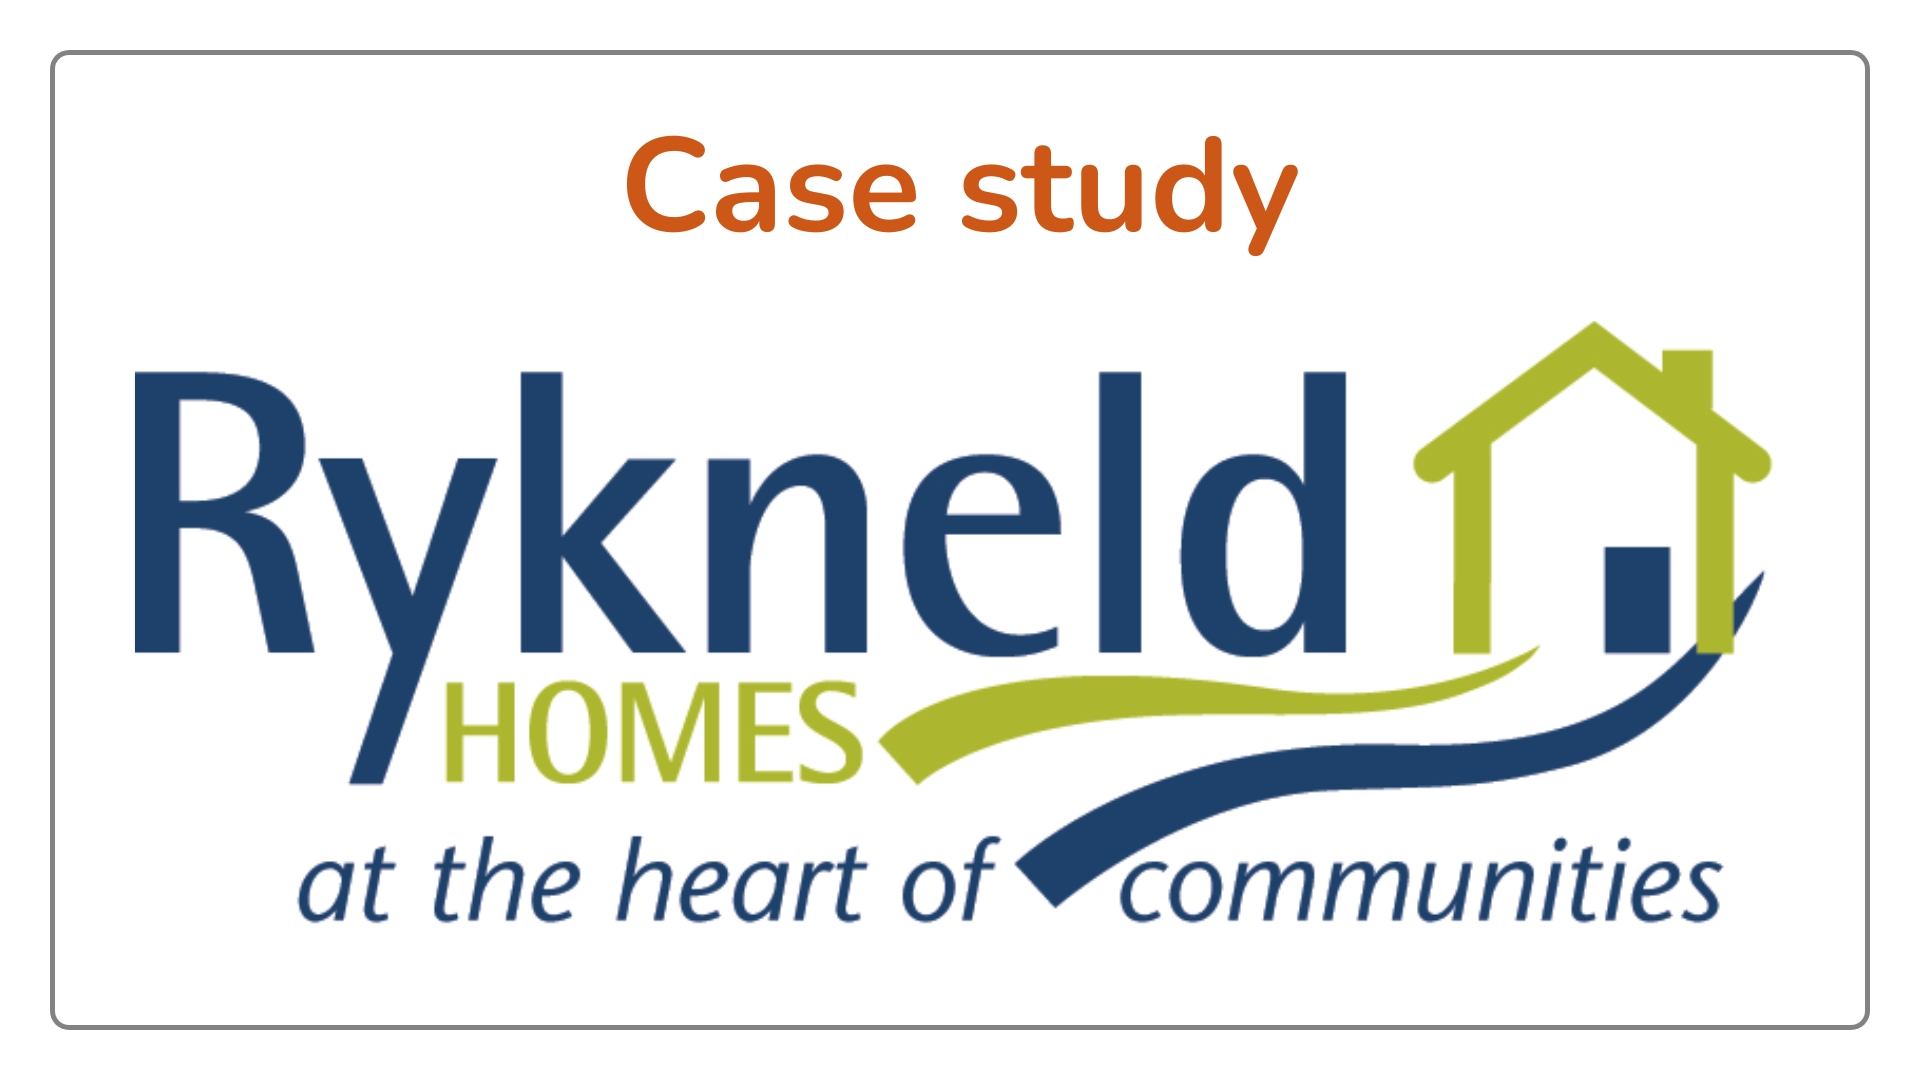 Housing & Property Services recruitment – 6 permanent positions in the last 12 months for Rykneld Homes